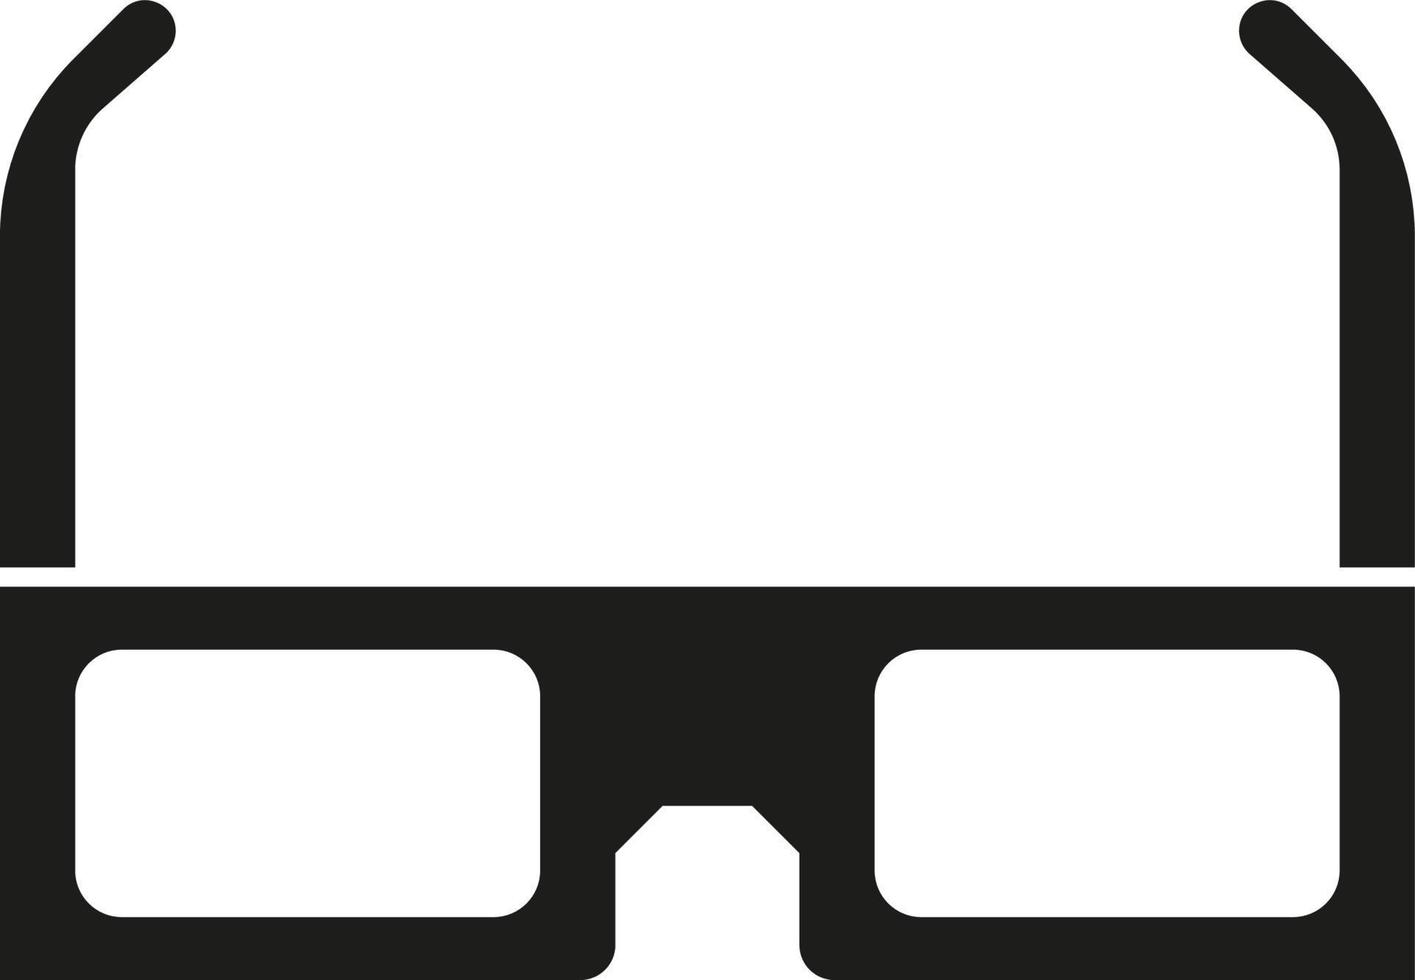 3D Glasses Icon isolated on White. Vector Illustration. 3d glasses Icon. Cinema Movie Film Watching Design Element.